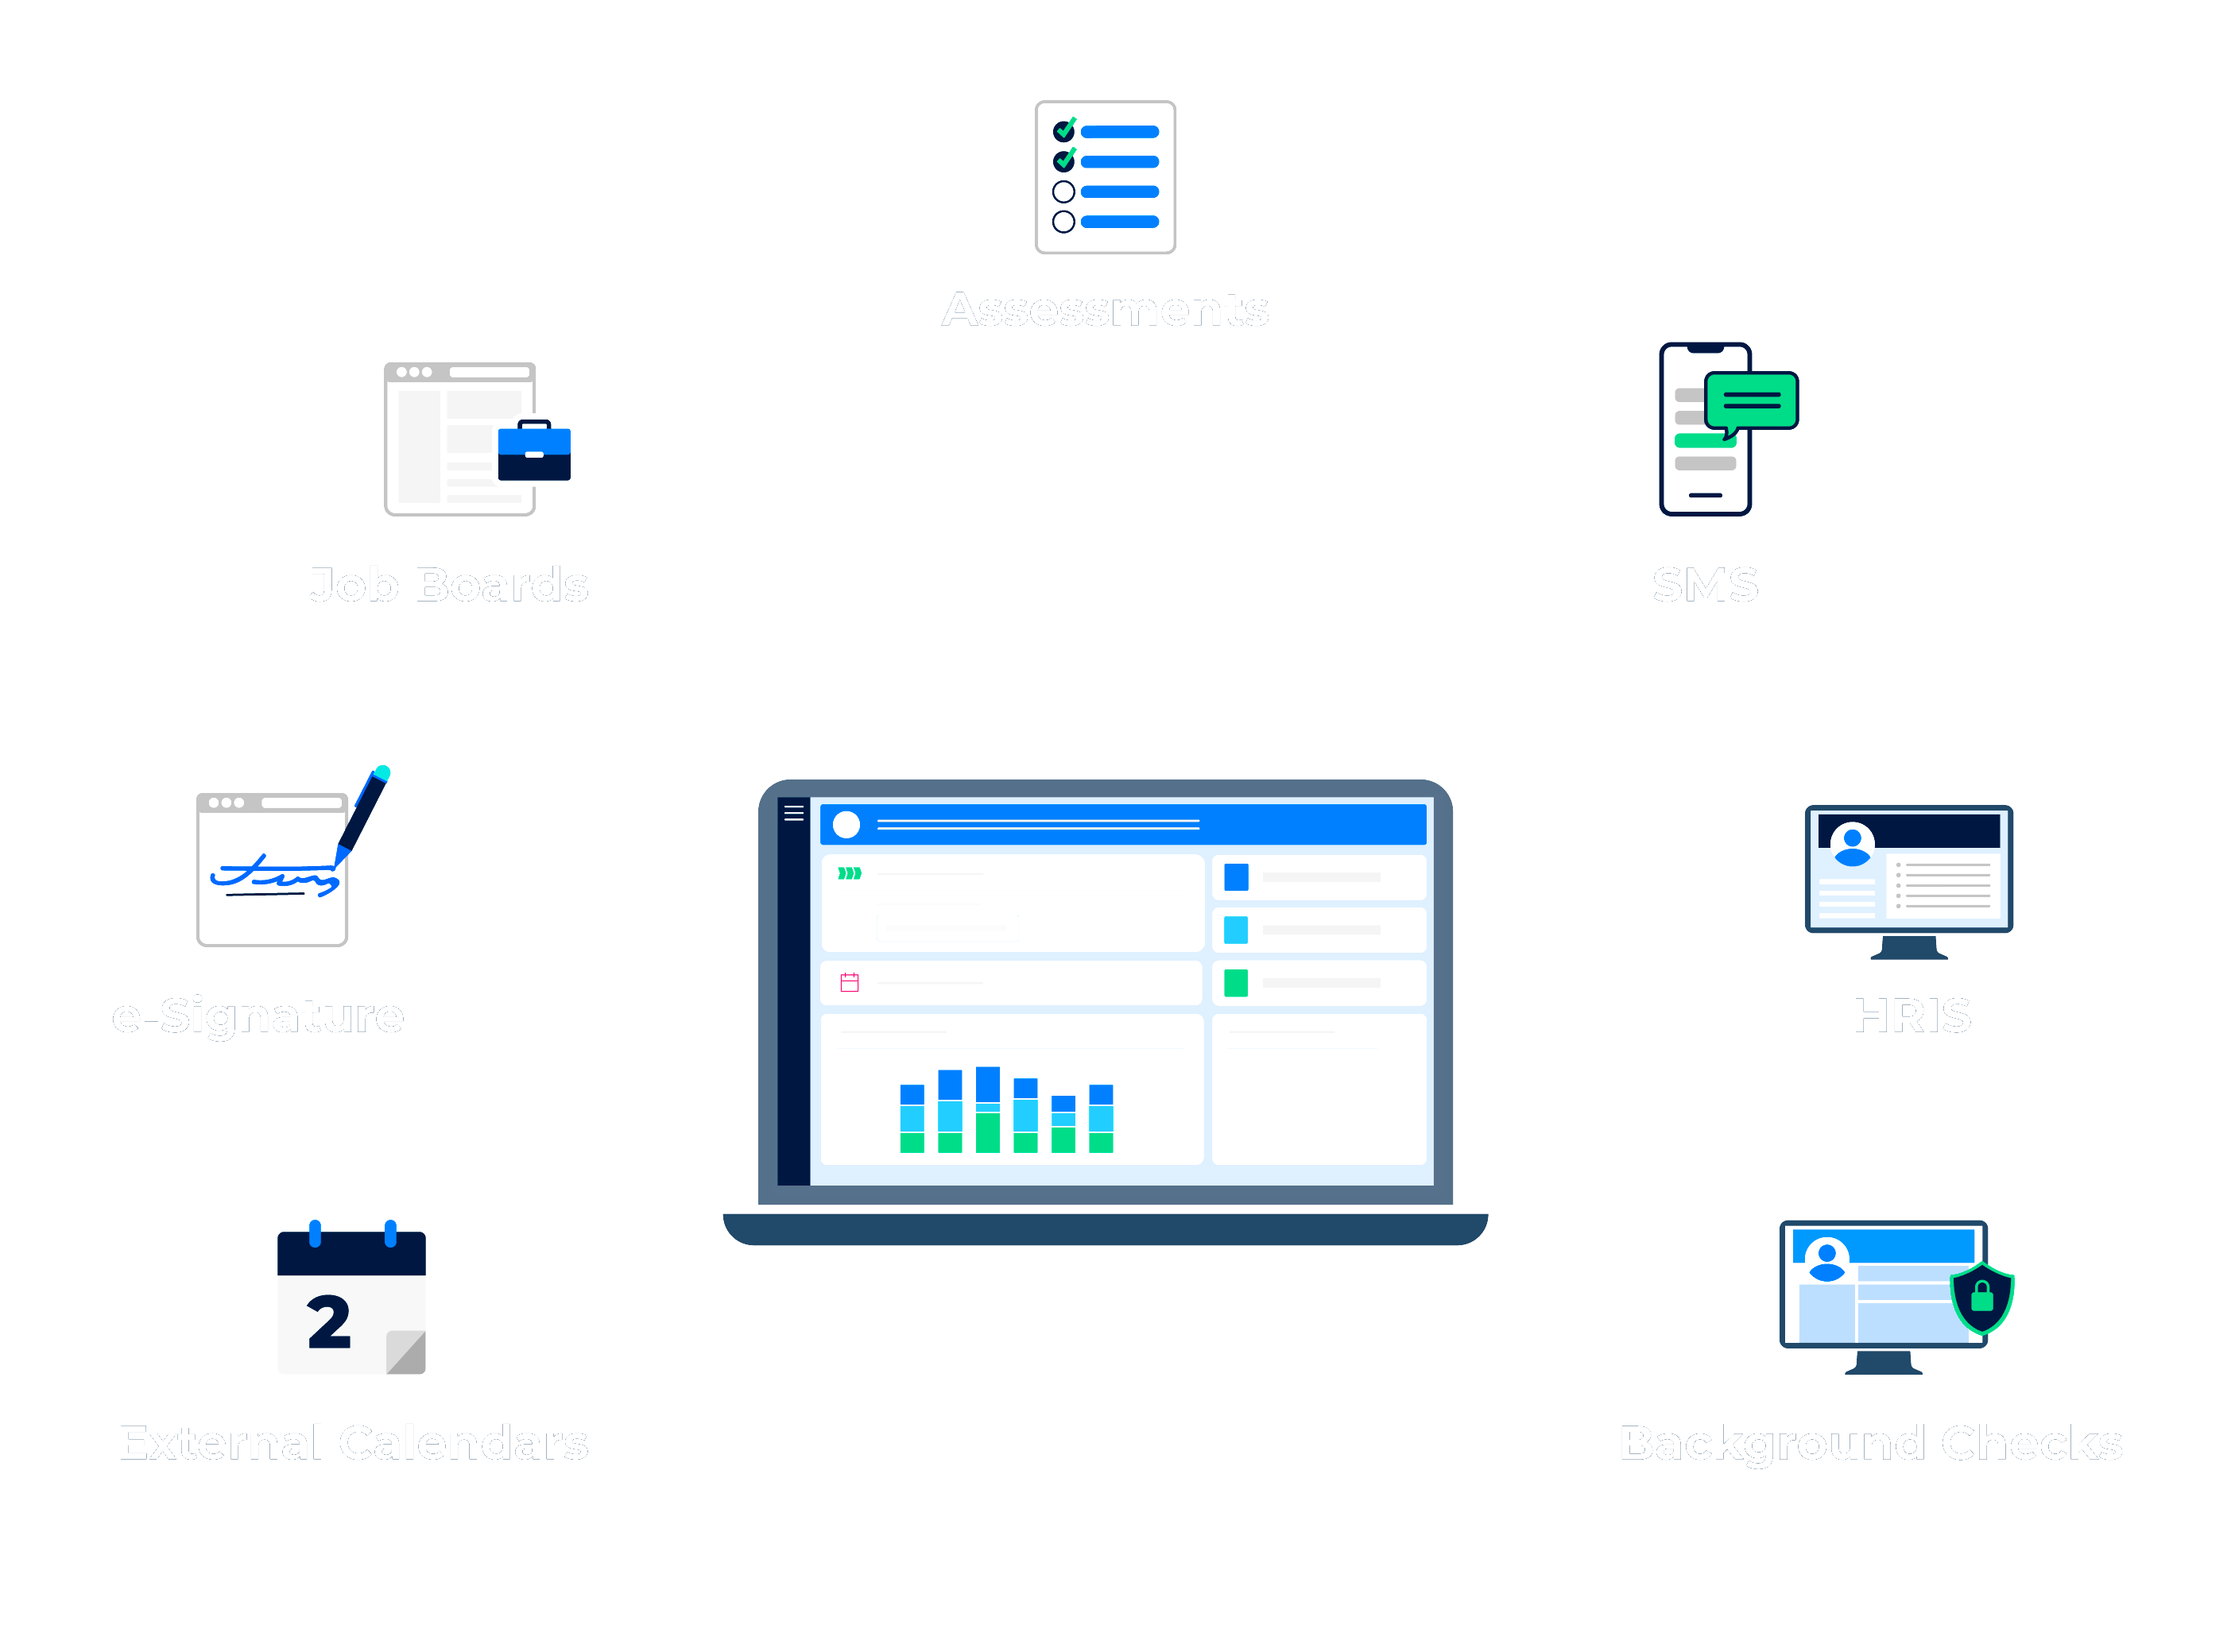 A series of icons depicting the types of applications Avature integrates with, including job boards, calendars, assessment and others.